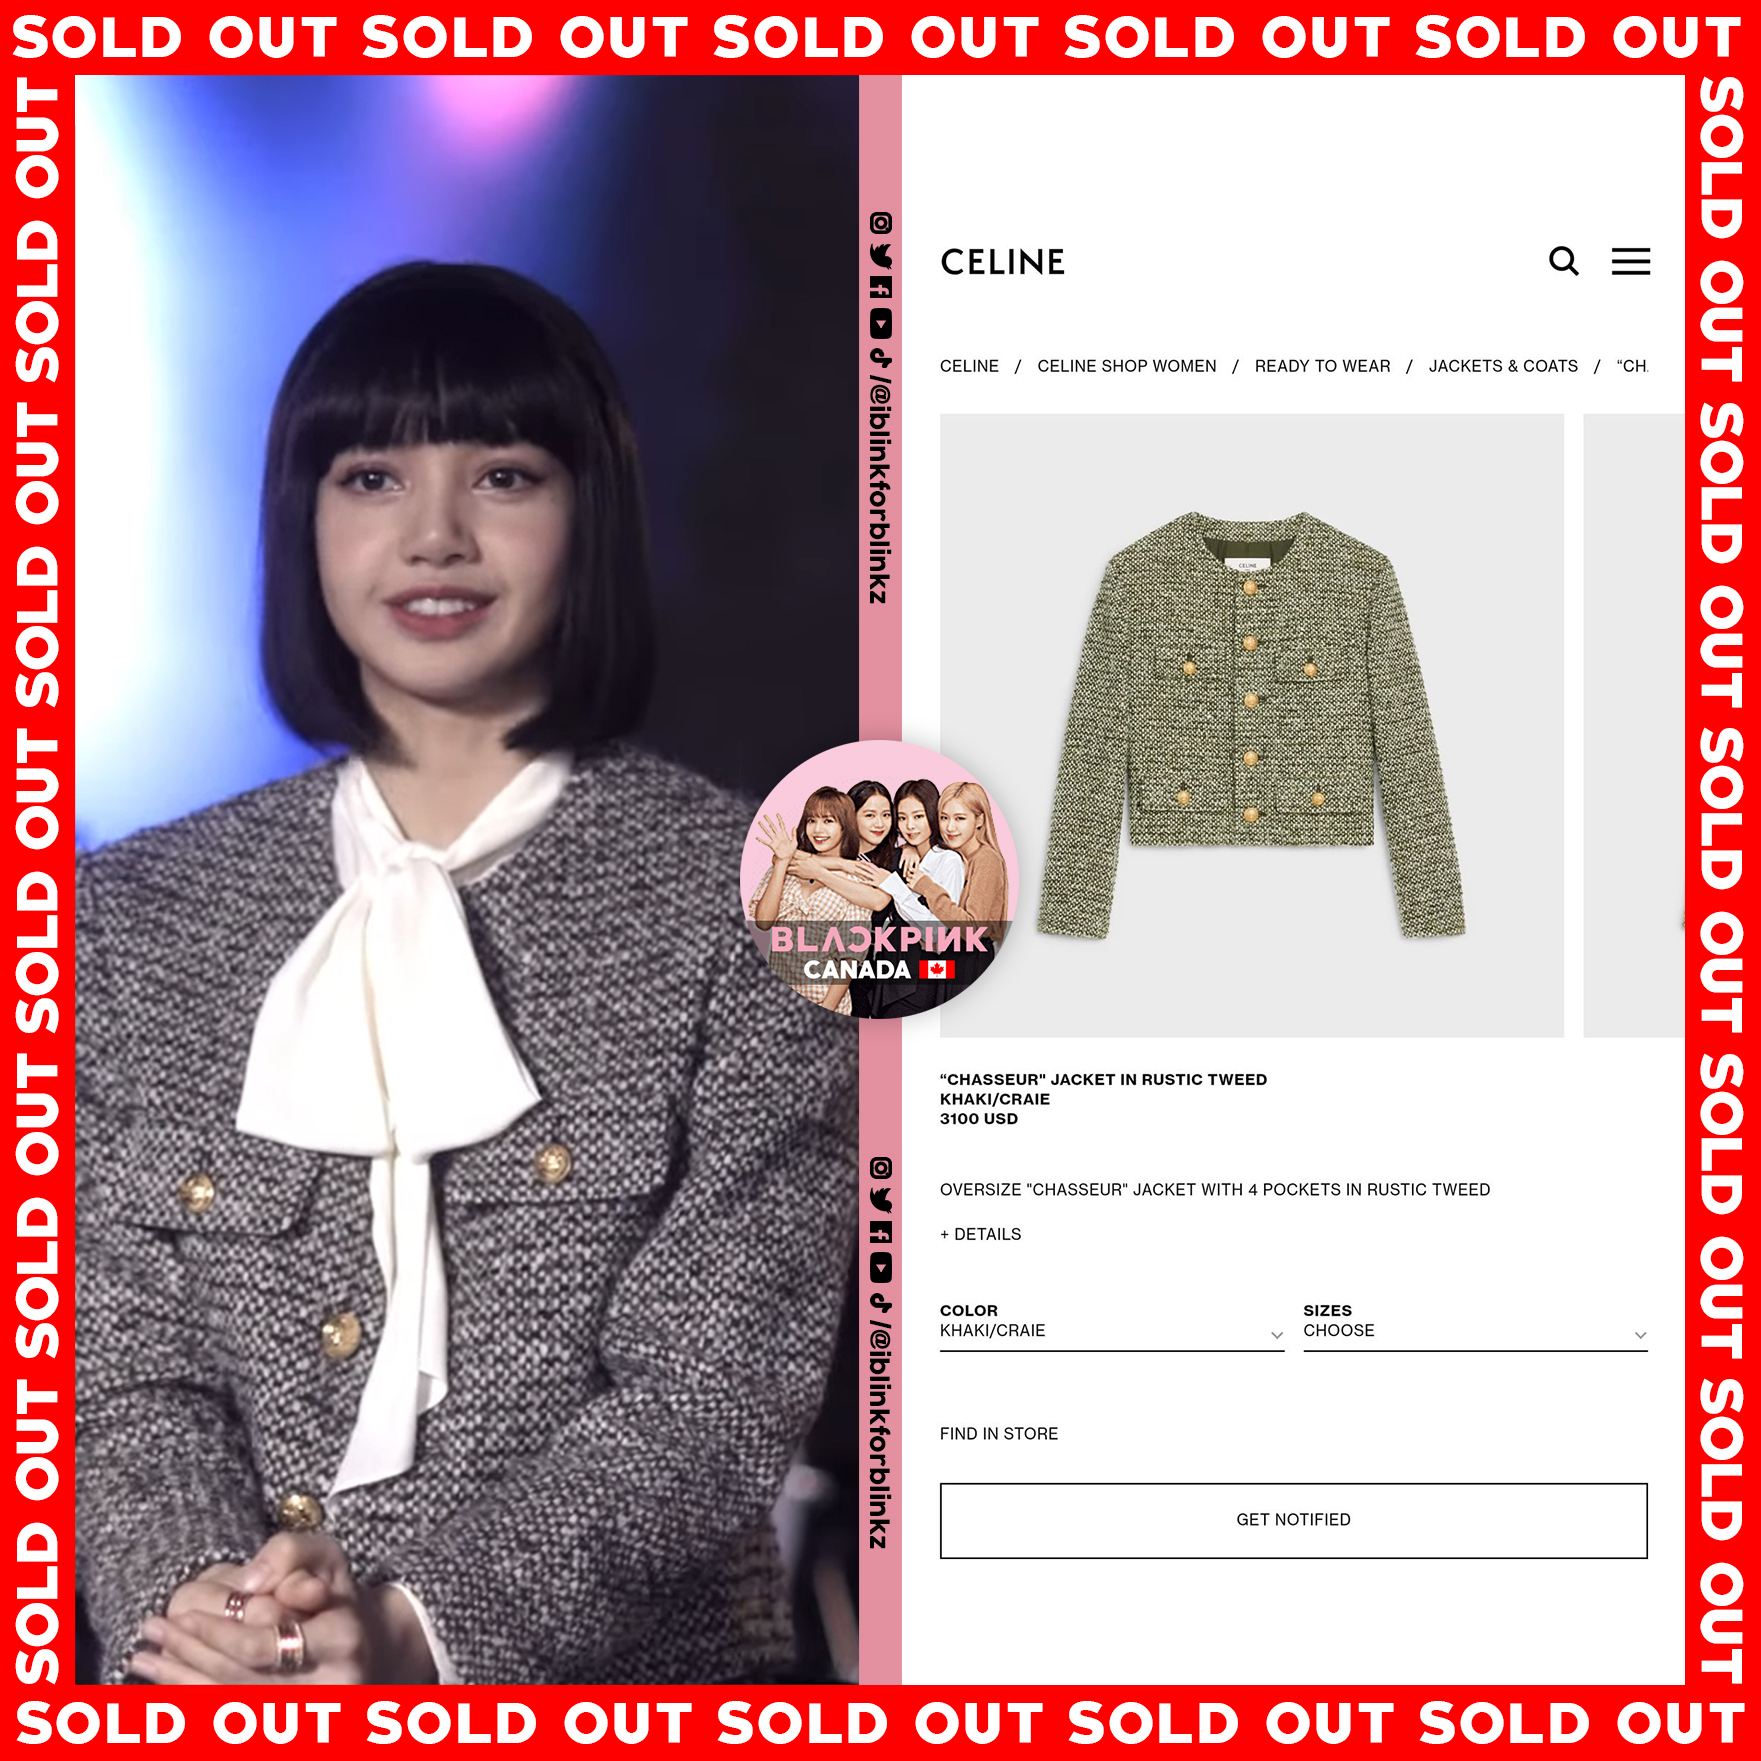 BLACKPINK CANADA 🇨🇦 2.0 on X: The power of LISA SOLD OUT items